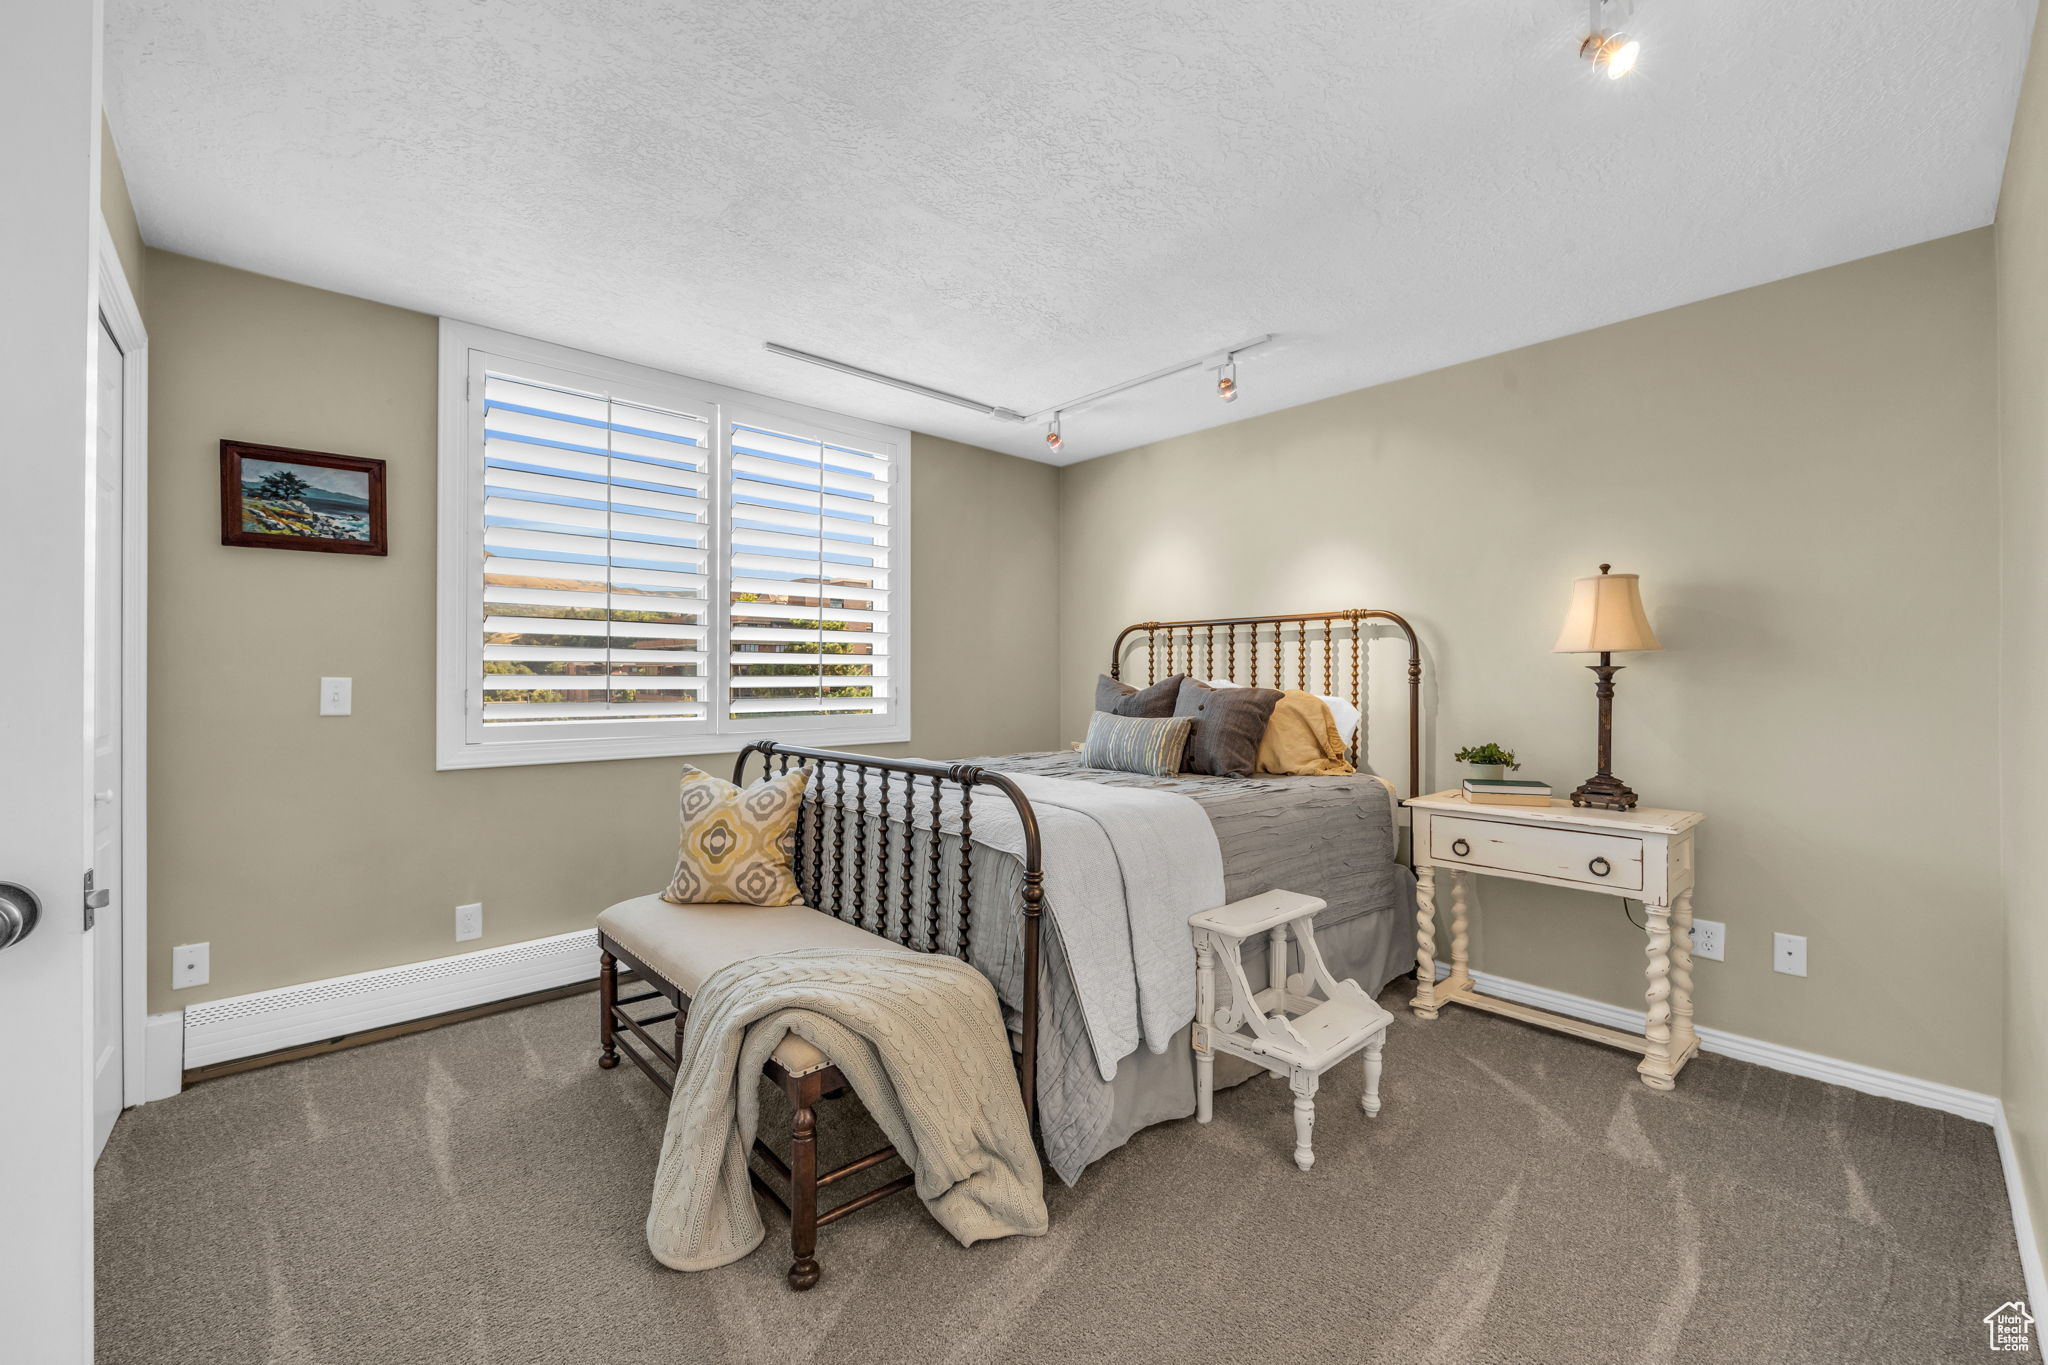 Bedroom featuring carpet, track lighting, a baseboard heating unit with an on-suite bathroom